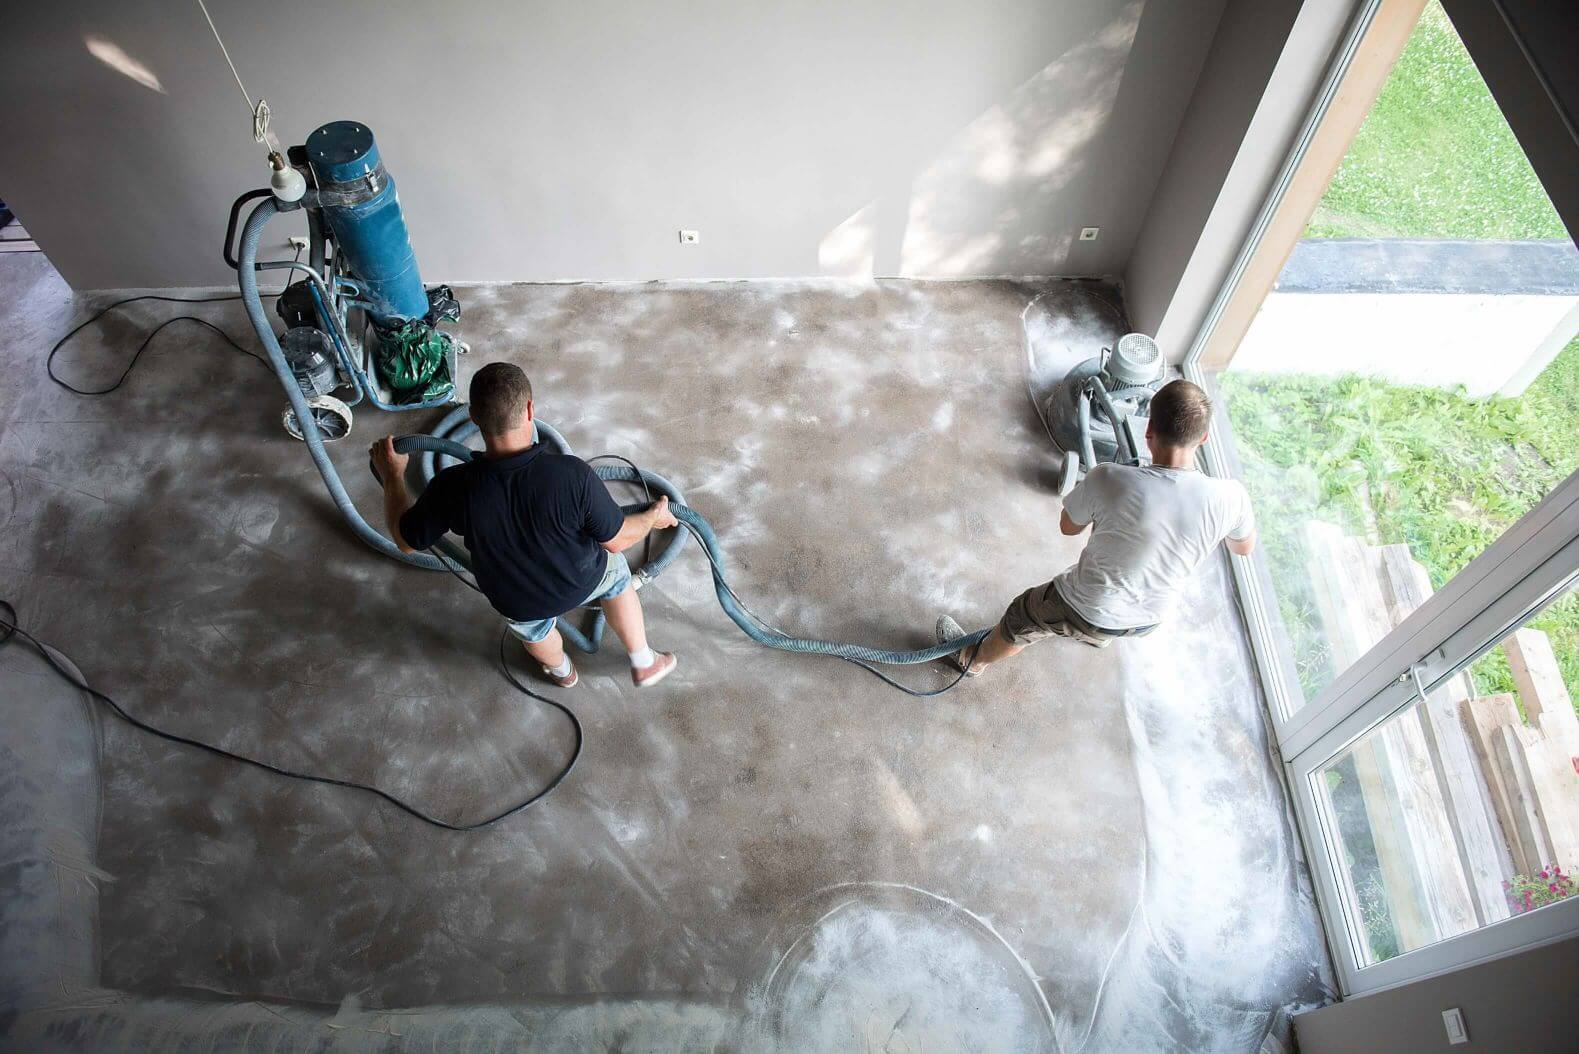 Preparation and surface grinding for a residential epoxy flooring  job in  Joondalup WA